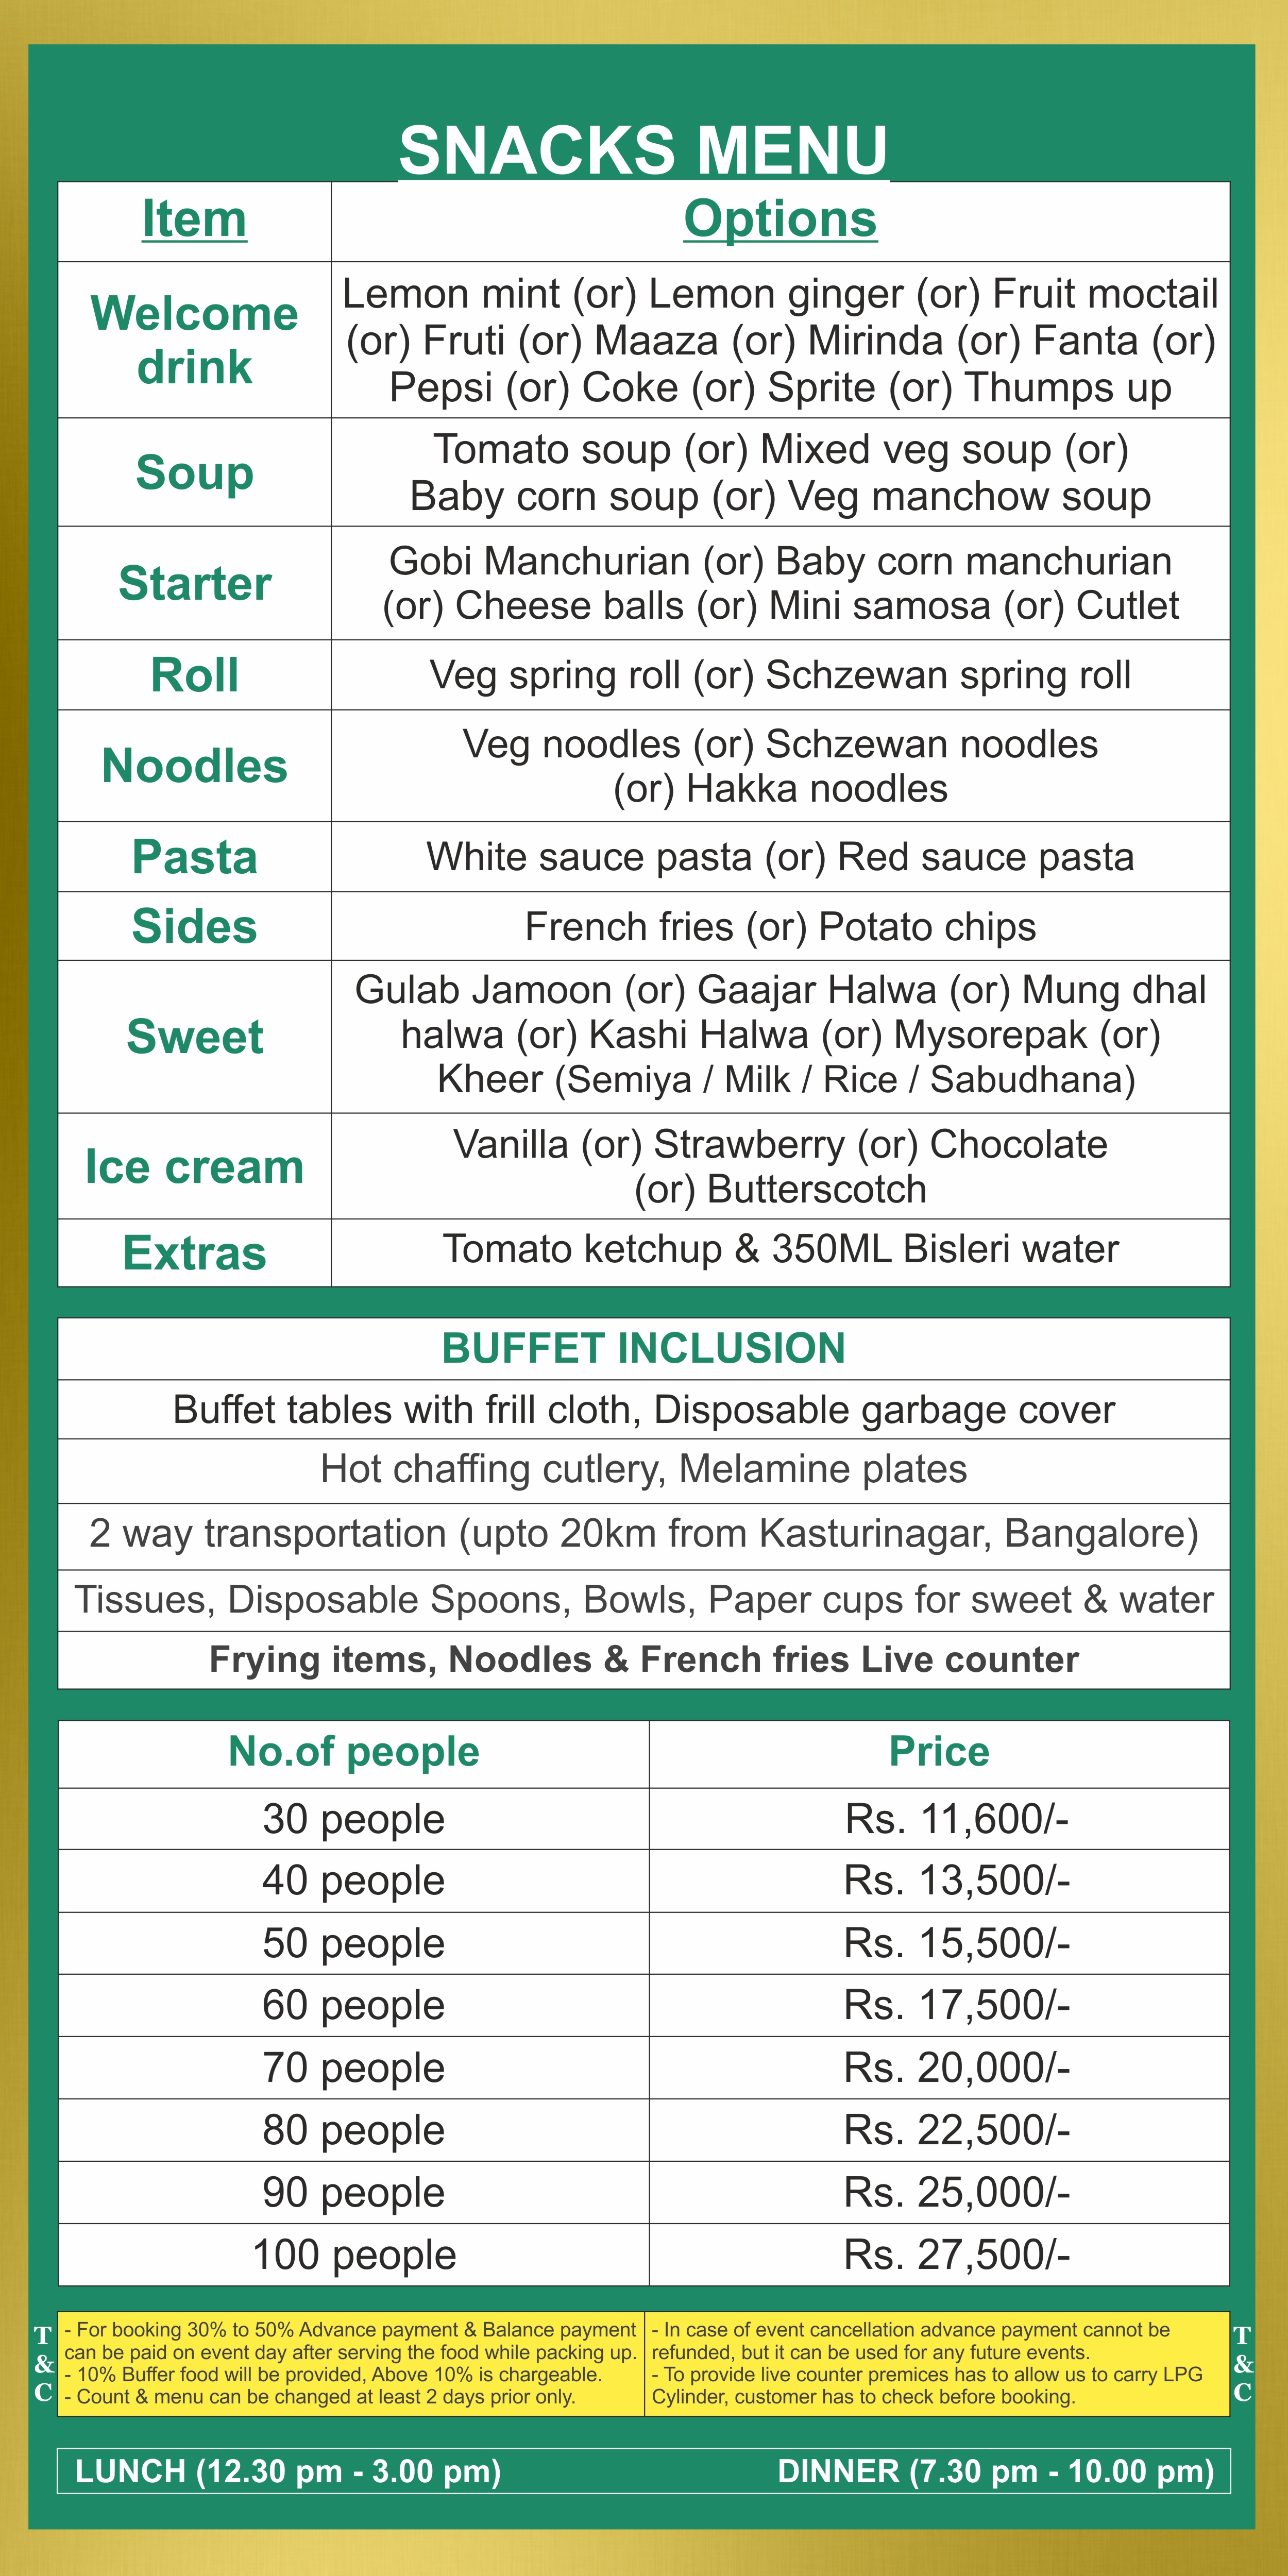 Snacks party catering menu price list in Bangalore